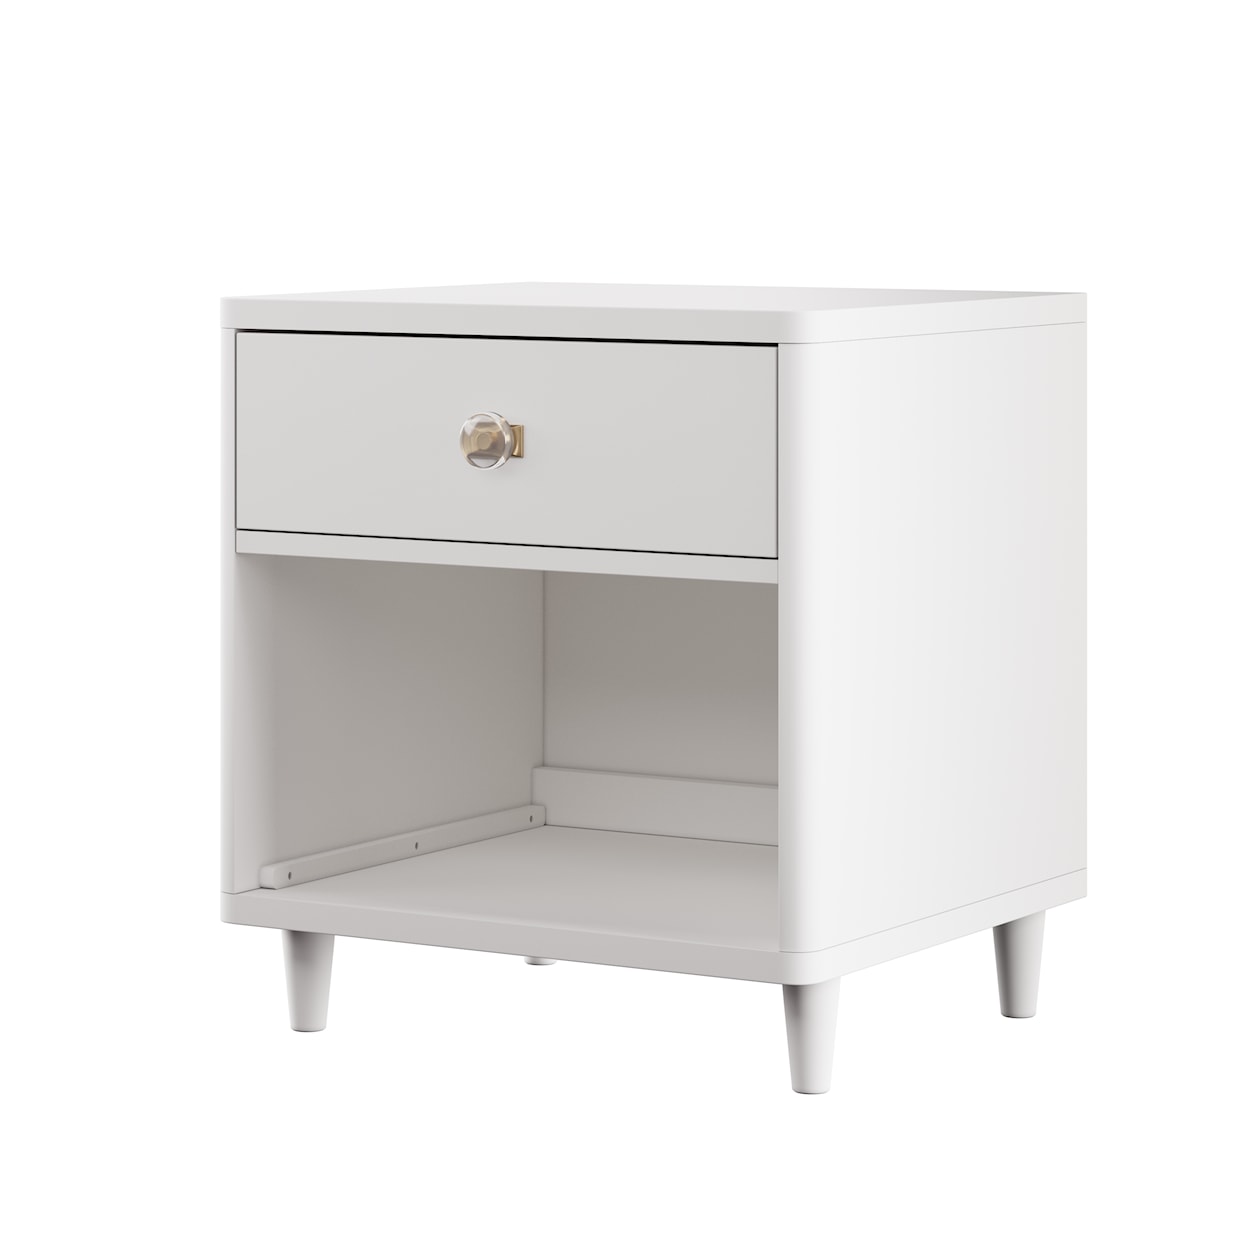 Accentrics Home Accents One Drawer Bookshelf Nightstand in White